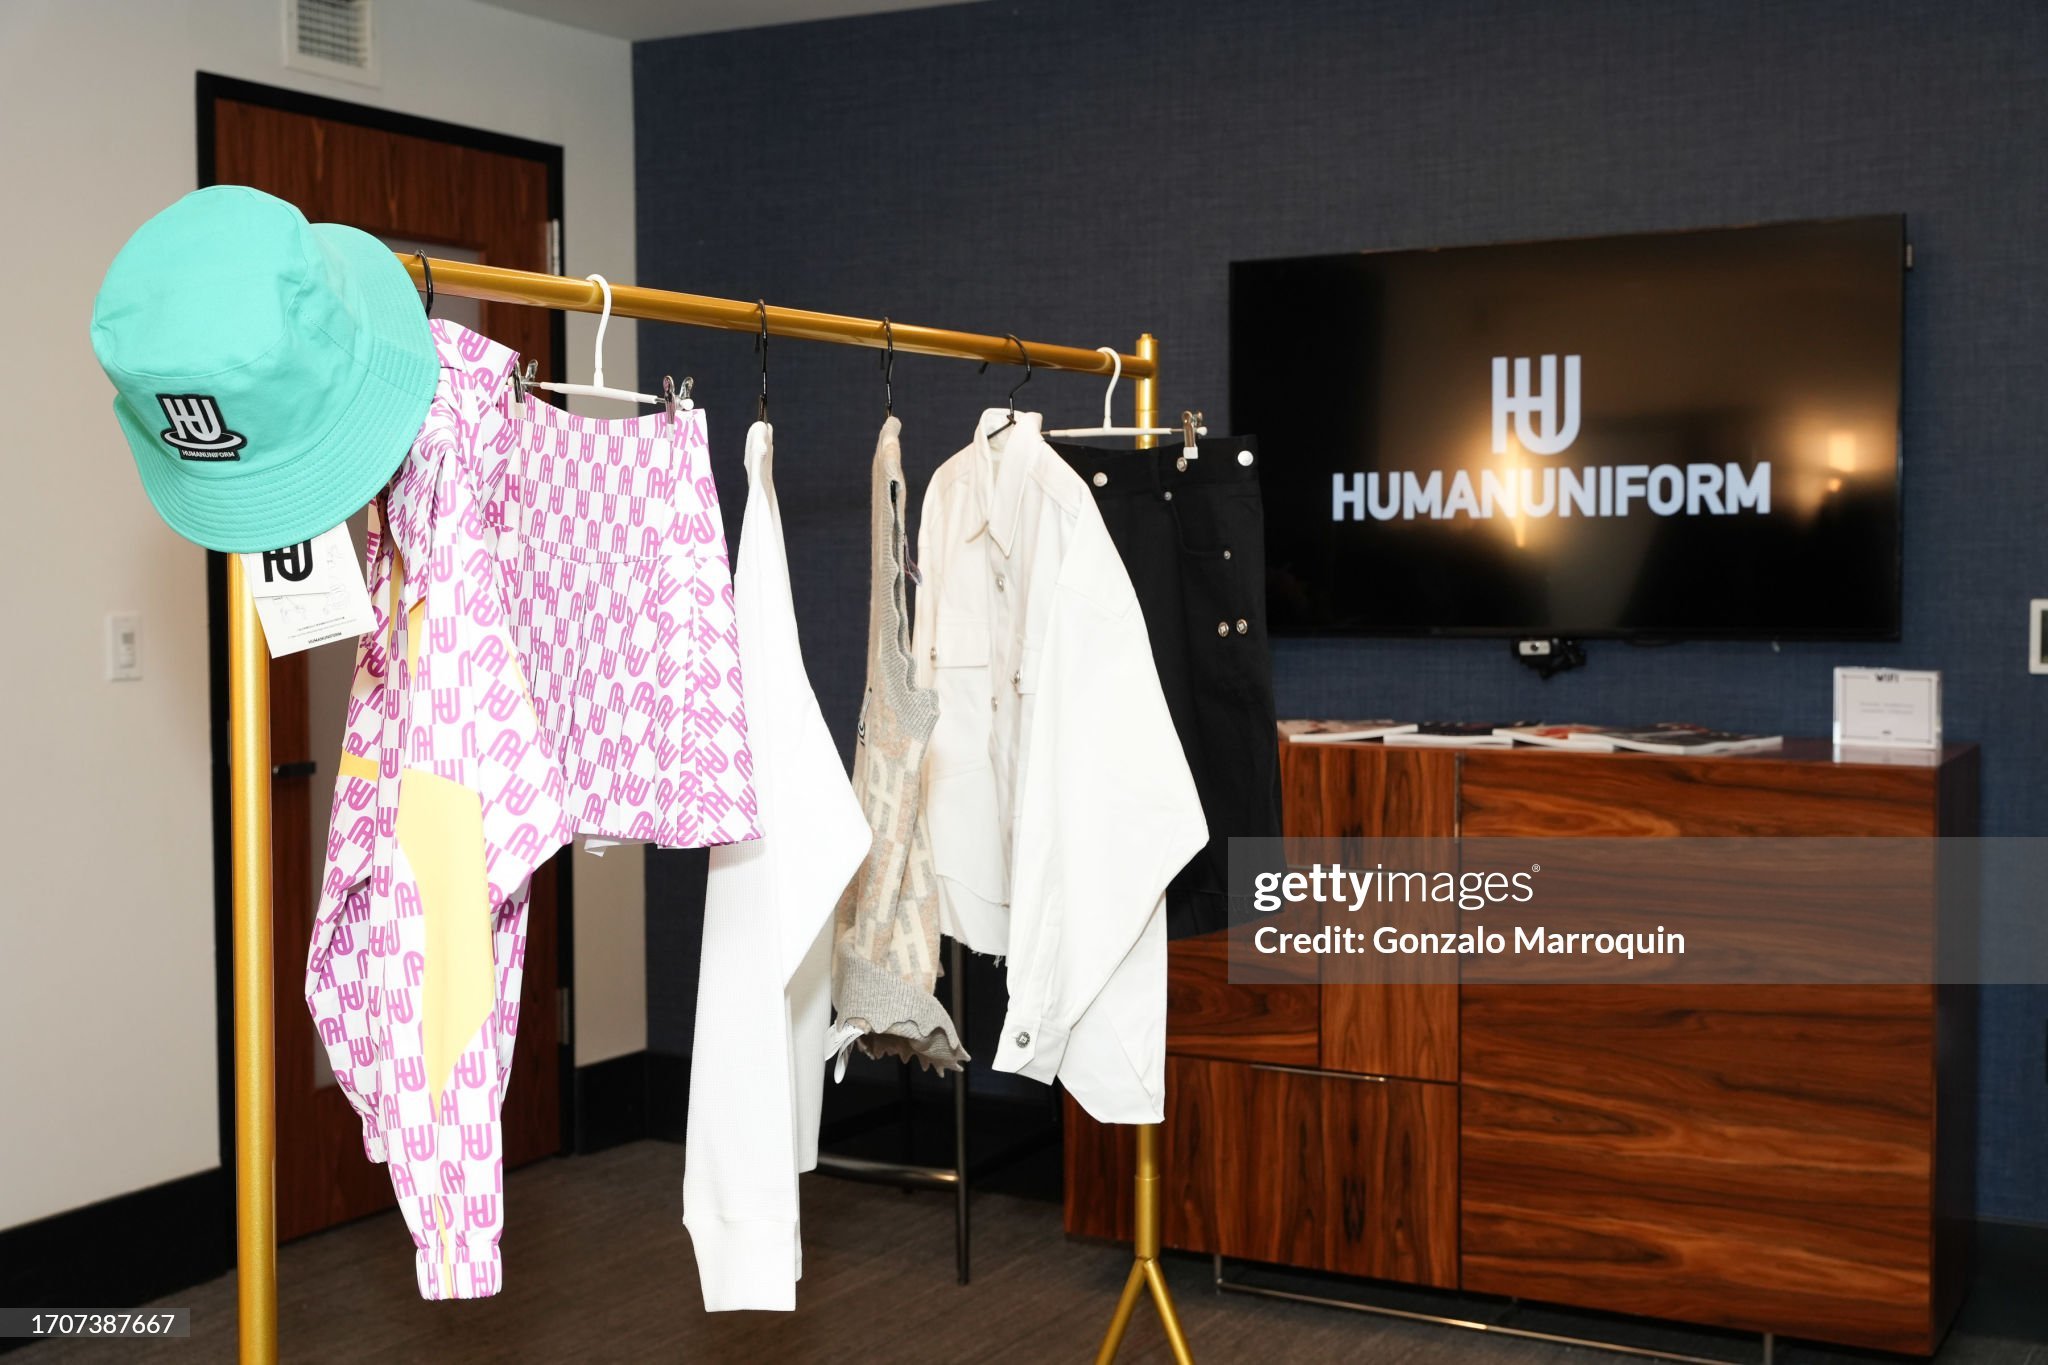 gettyimages-1707387667-2048x2048.jpg